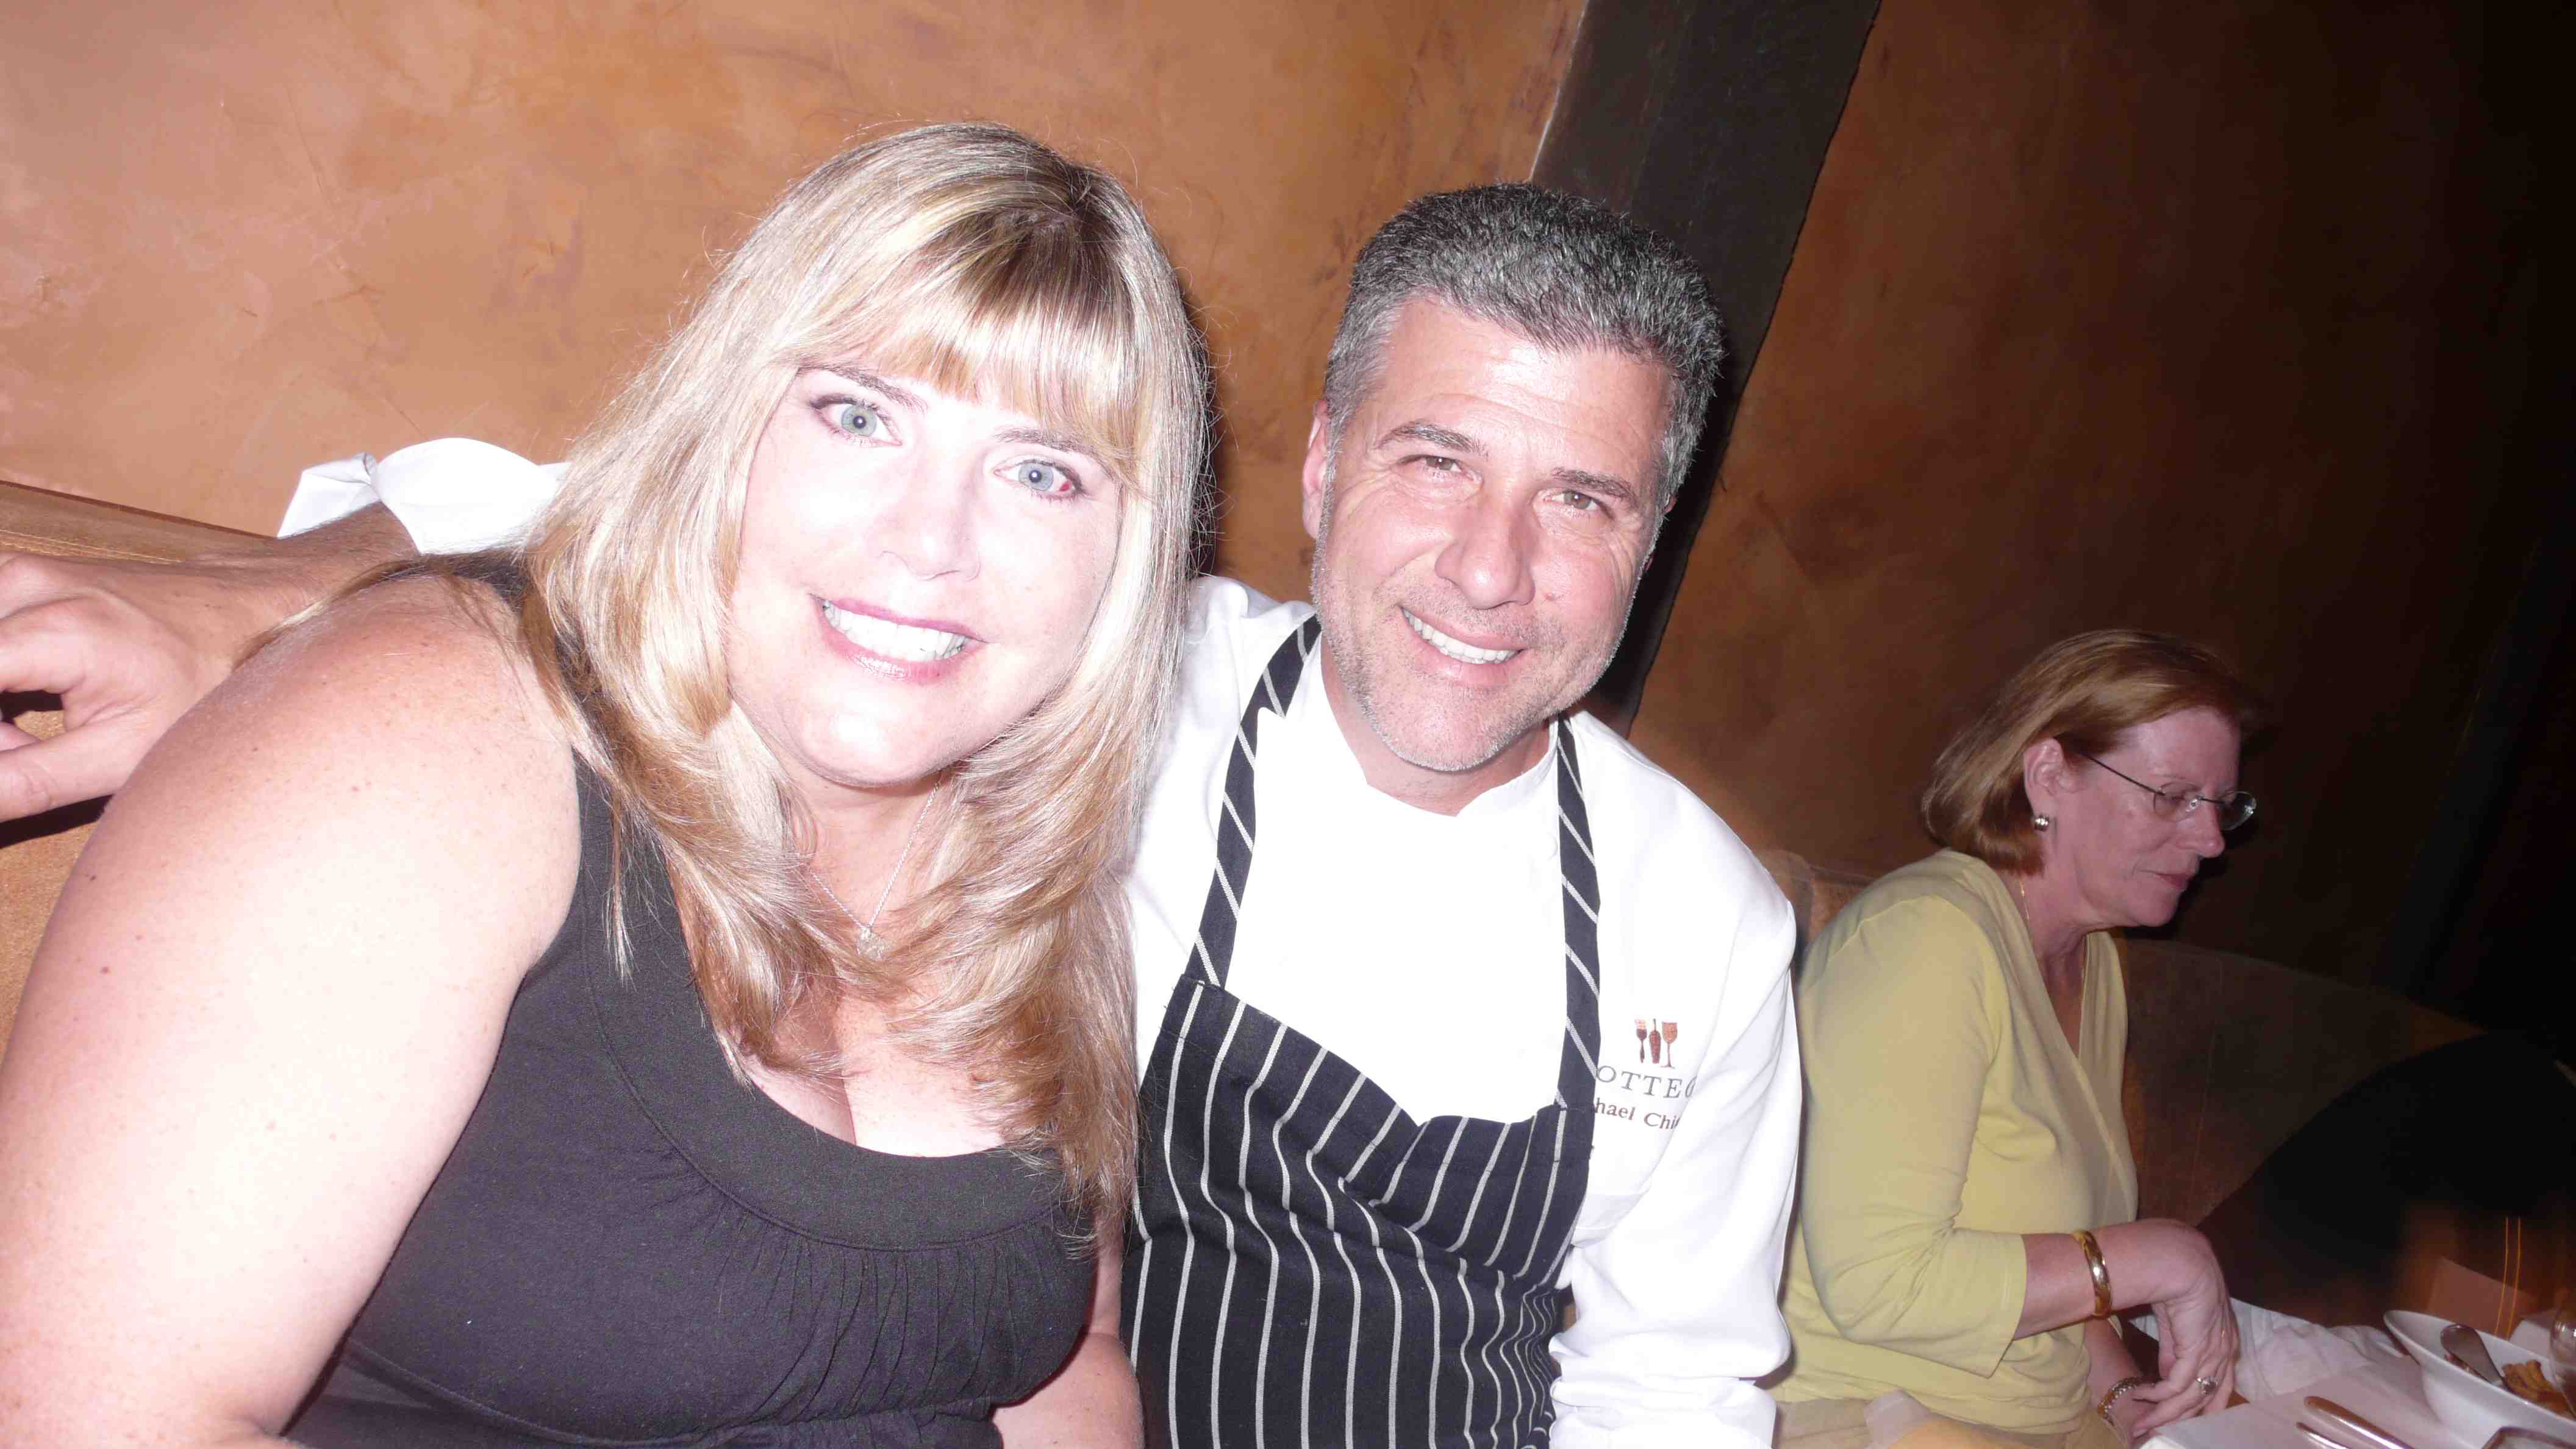 Chef Michael Chiarello, stopping by at our table at Bottega